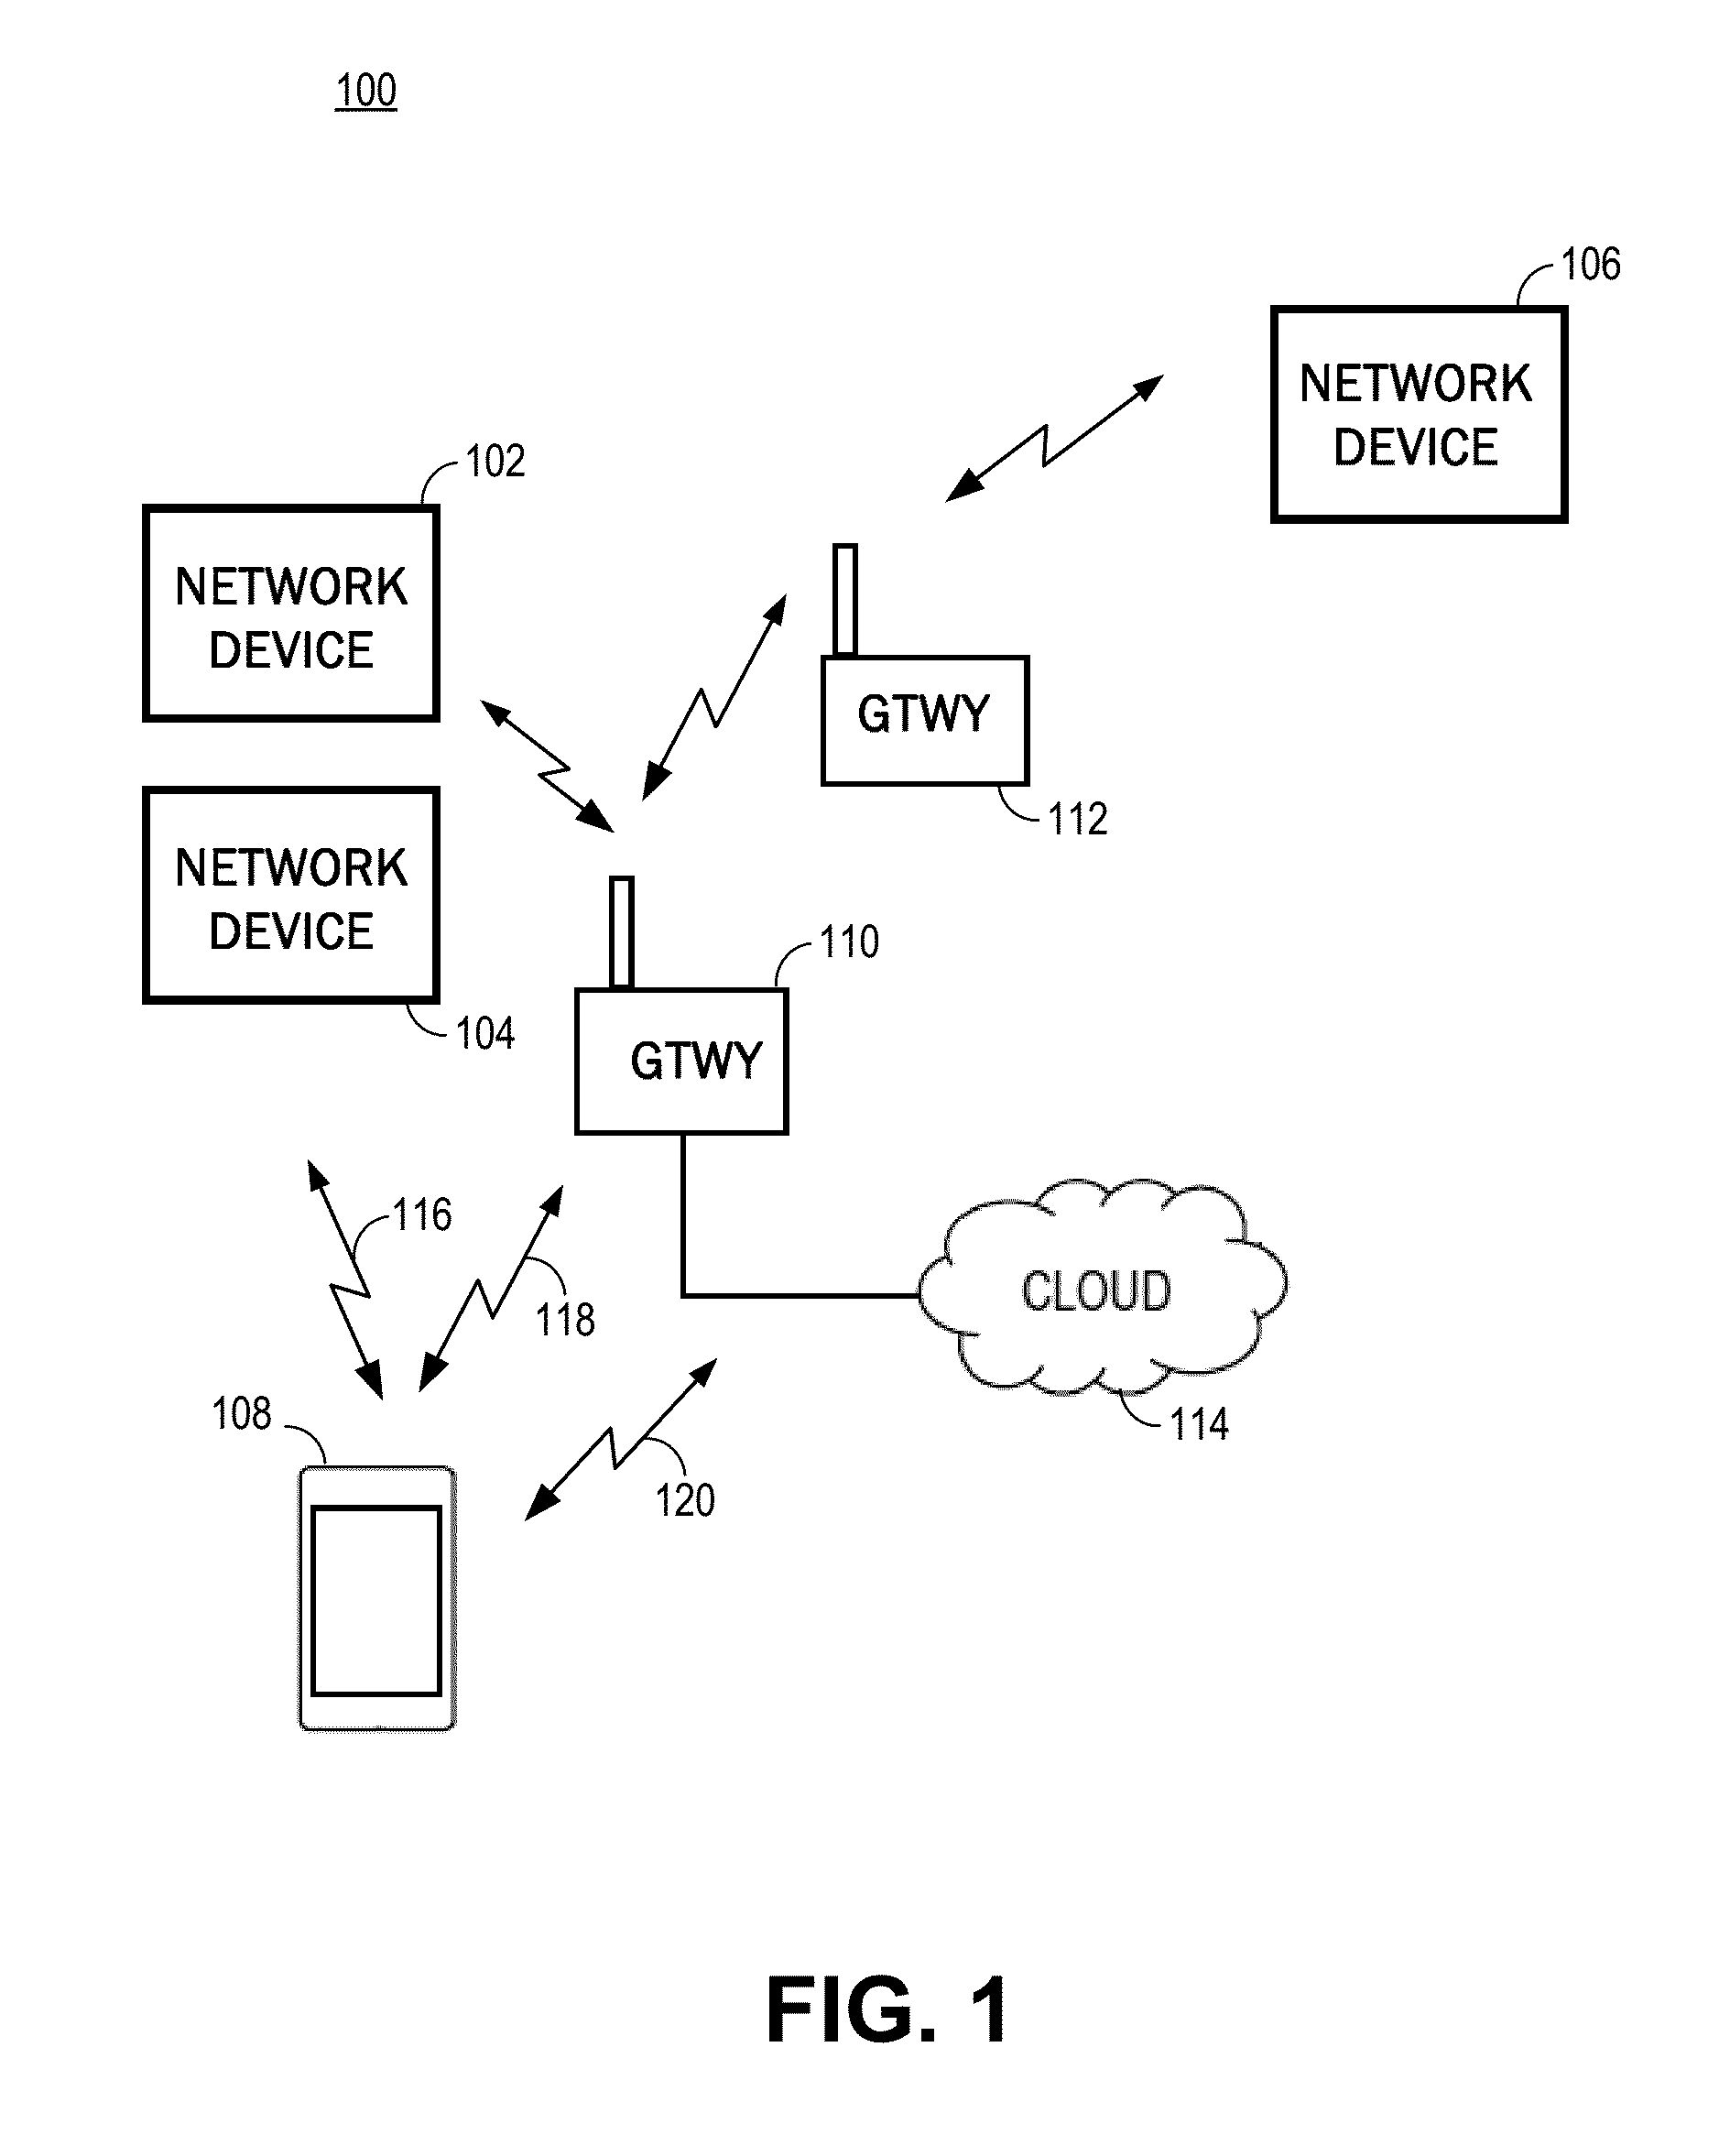 Controlling settings and attributes related to operation of devices in a network